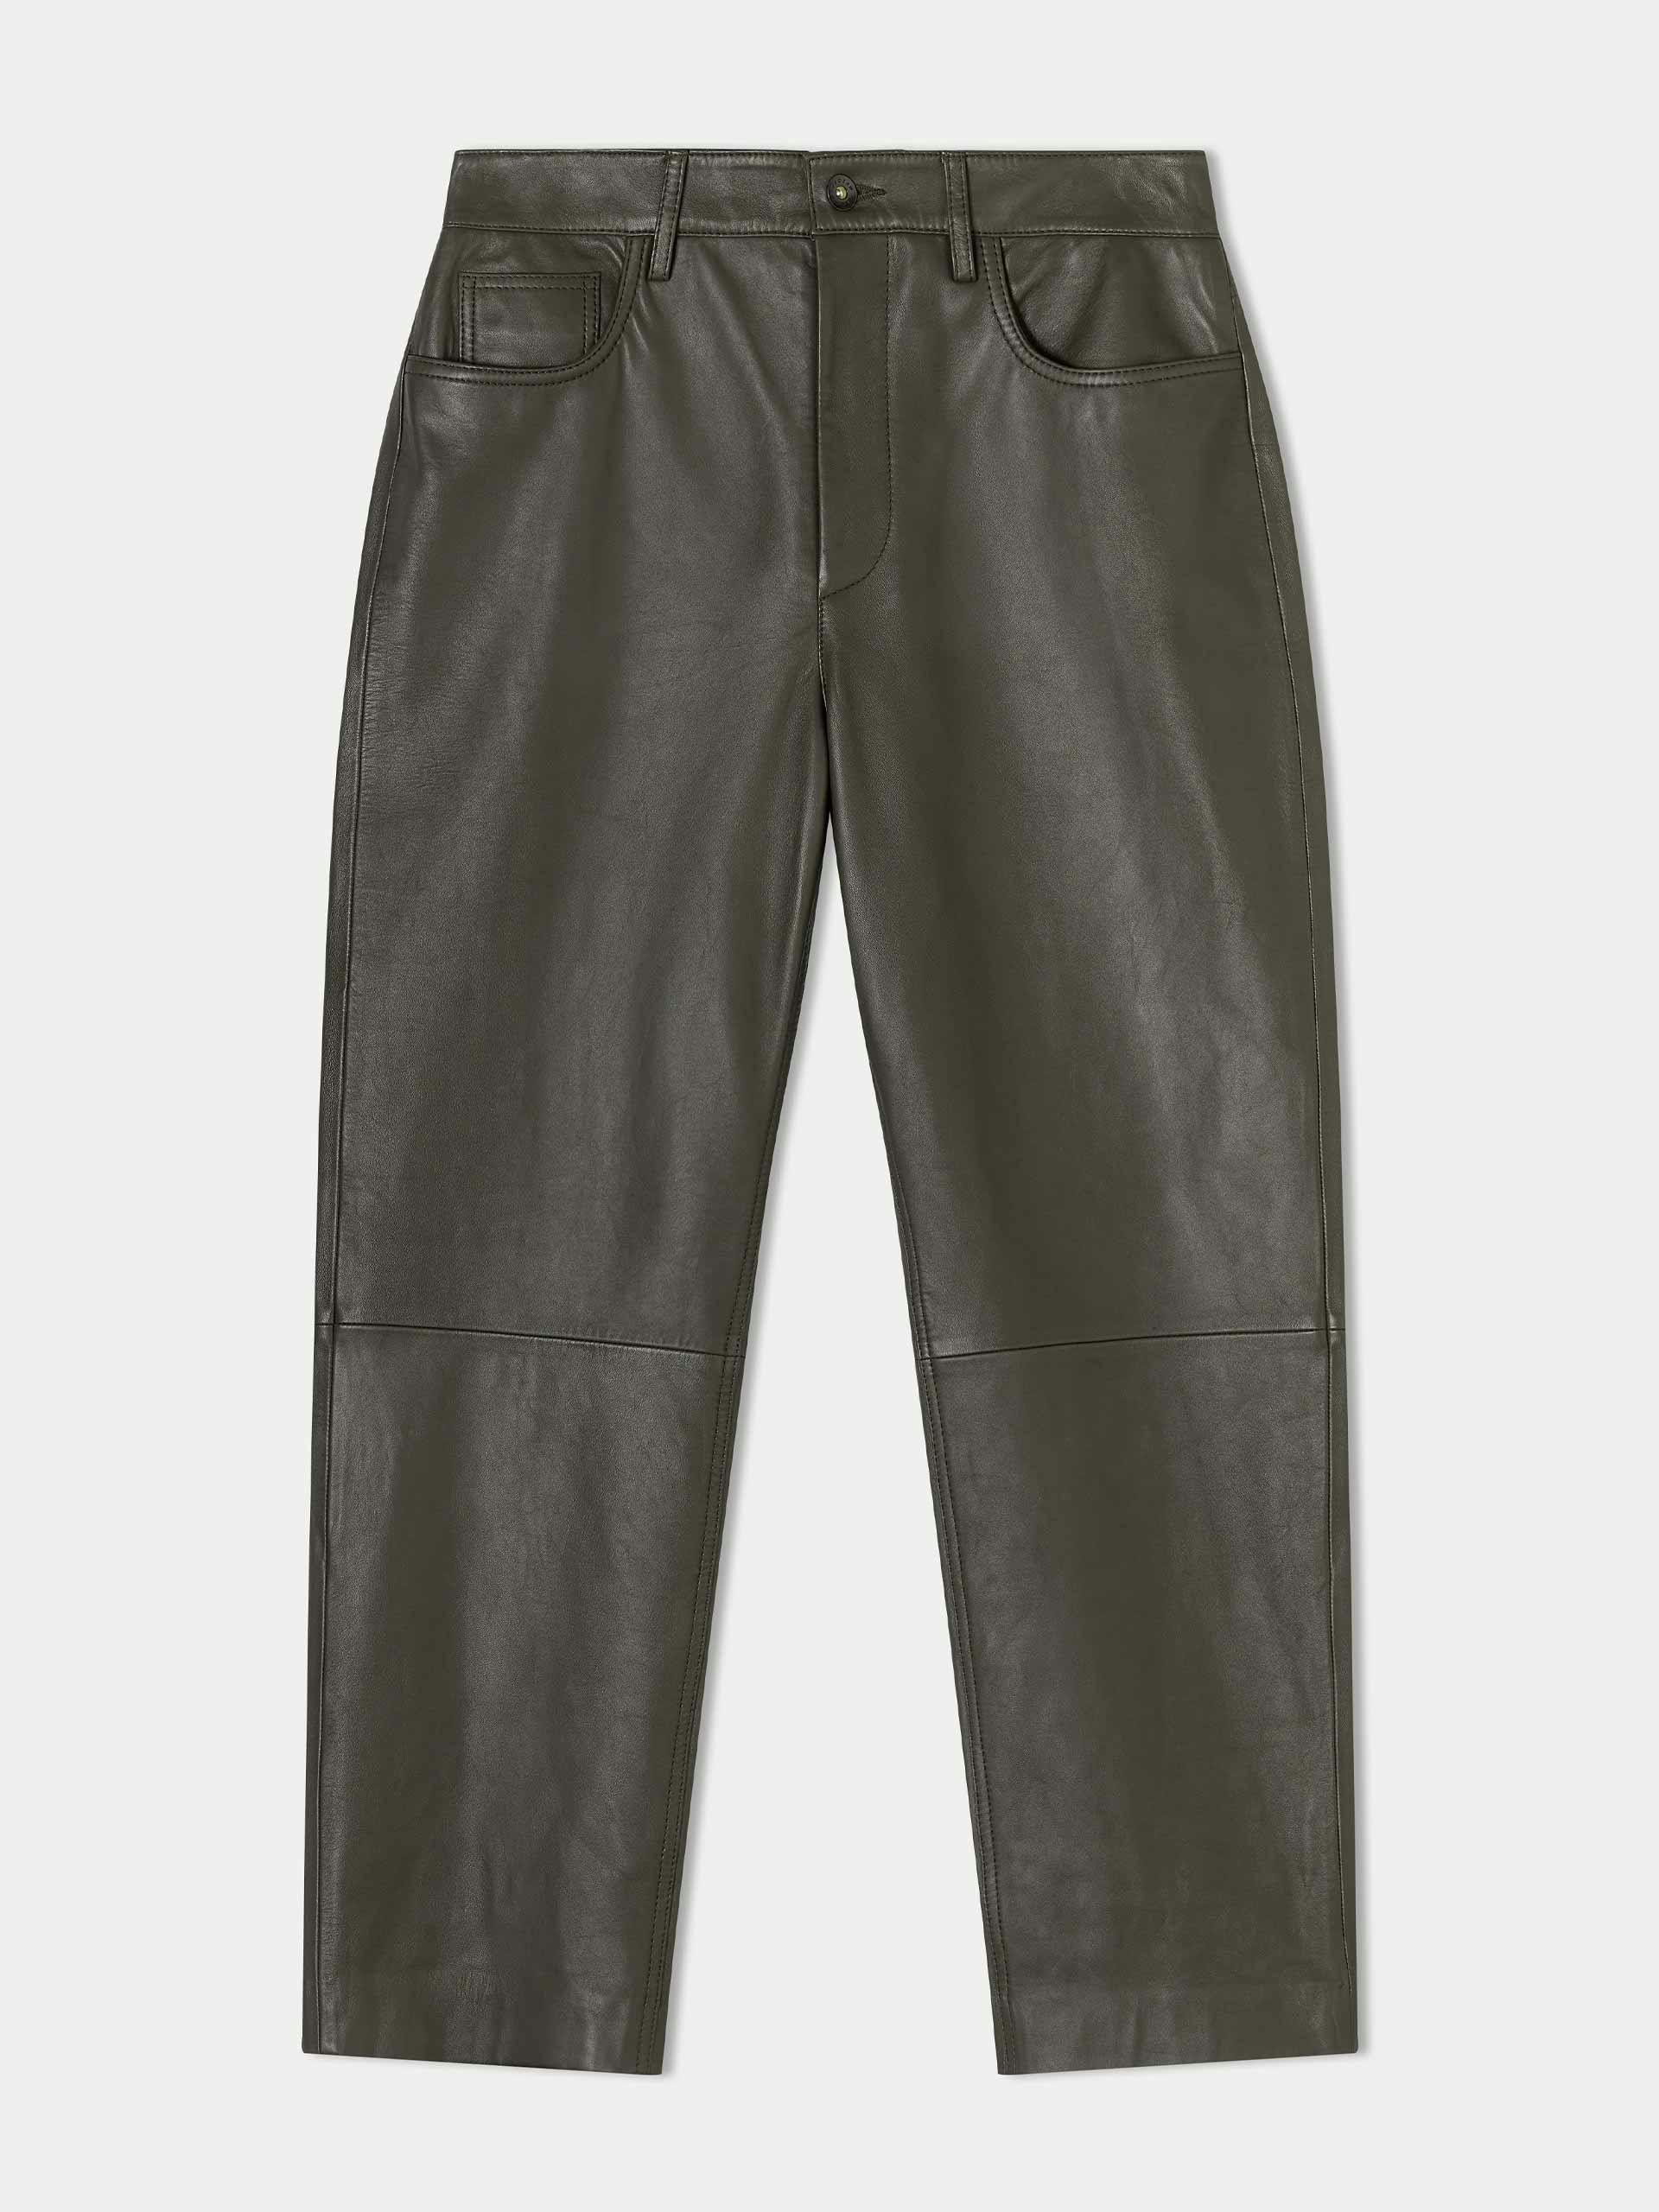 Dark brown leather trousers